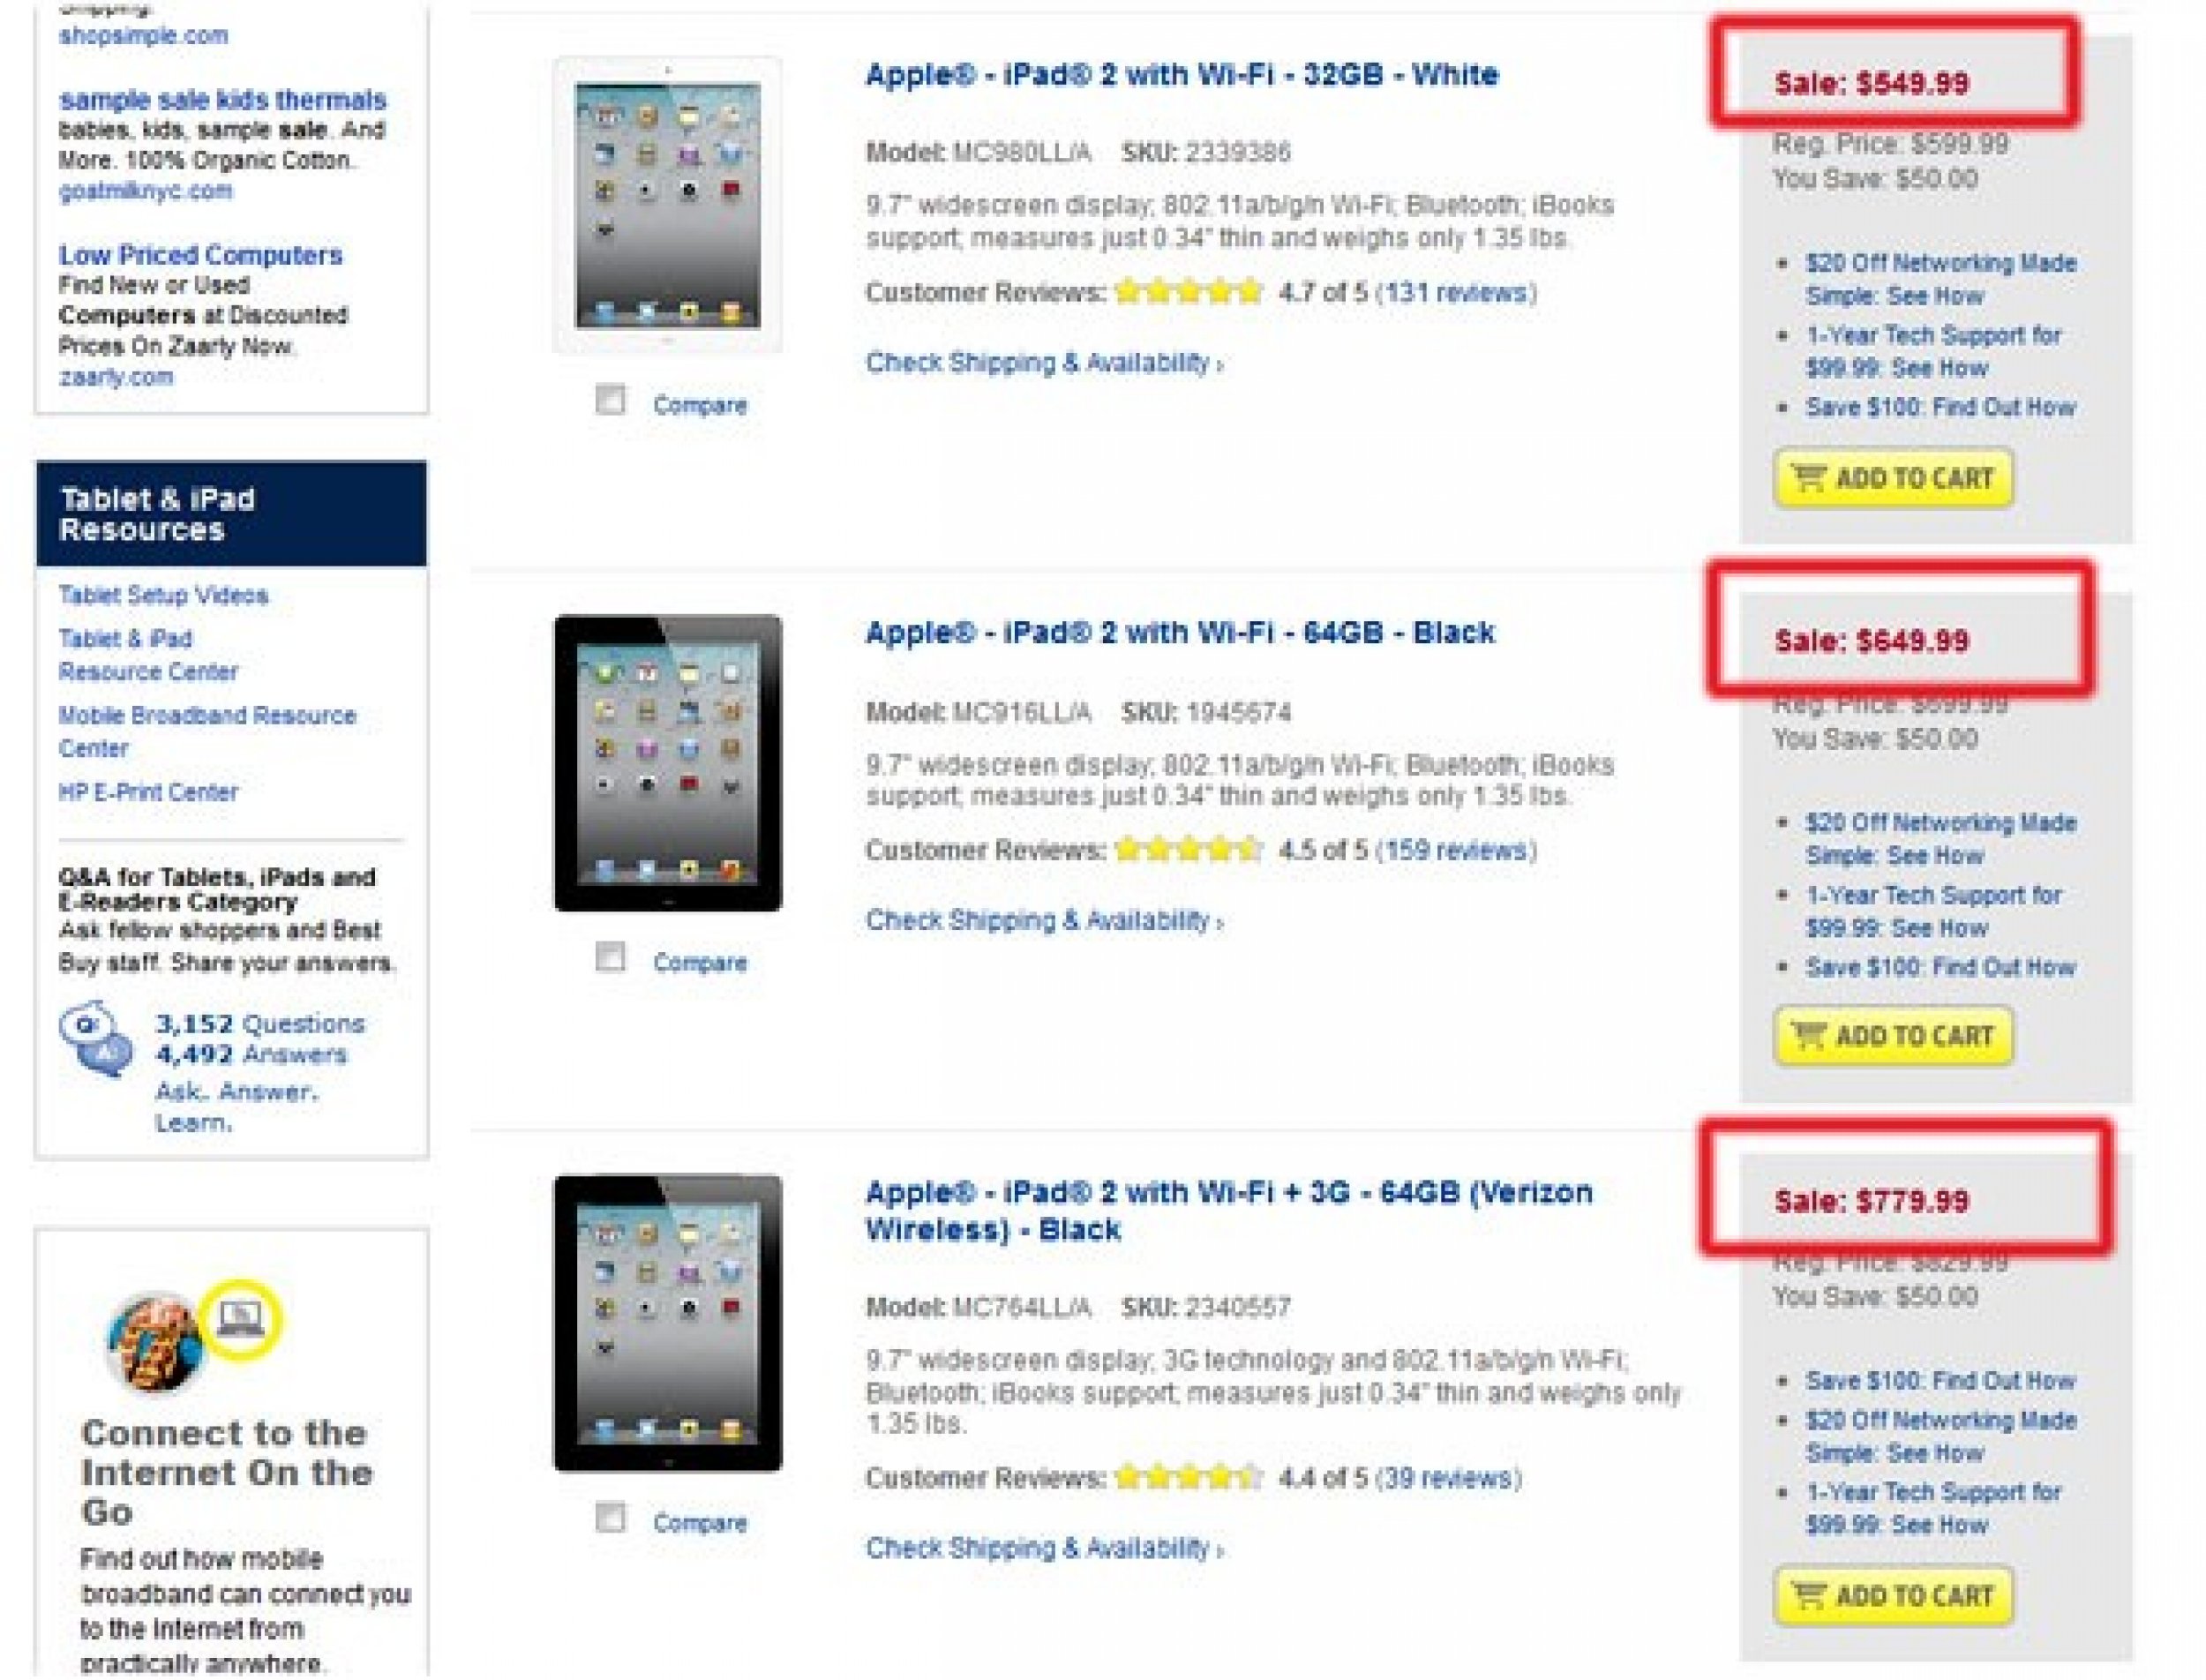 Best Buy has begun offering 50 off on all iPad models on Sunday.